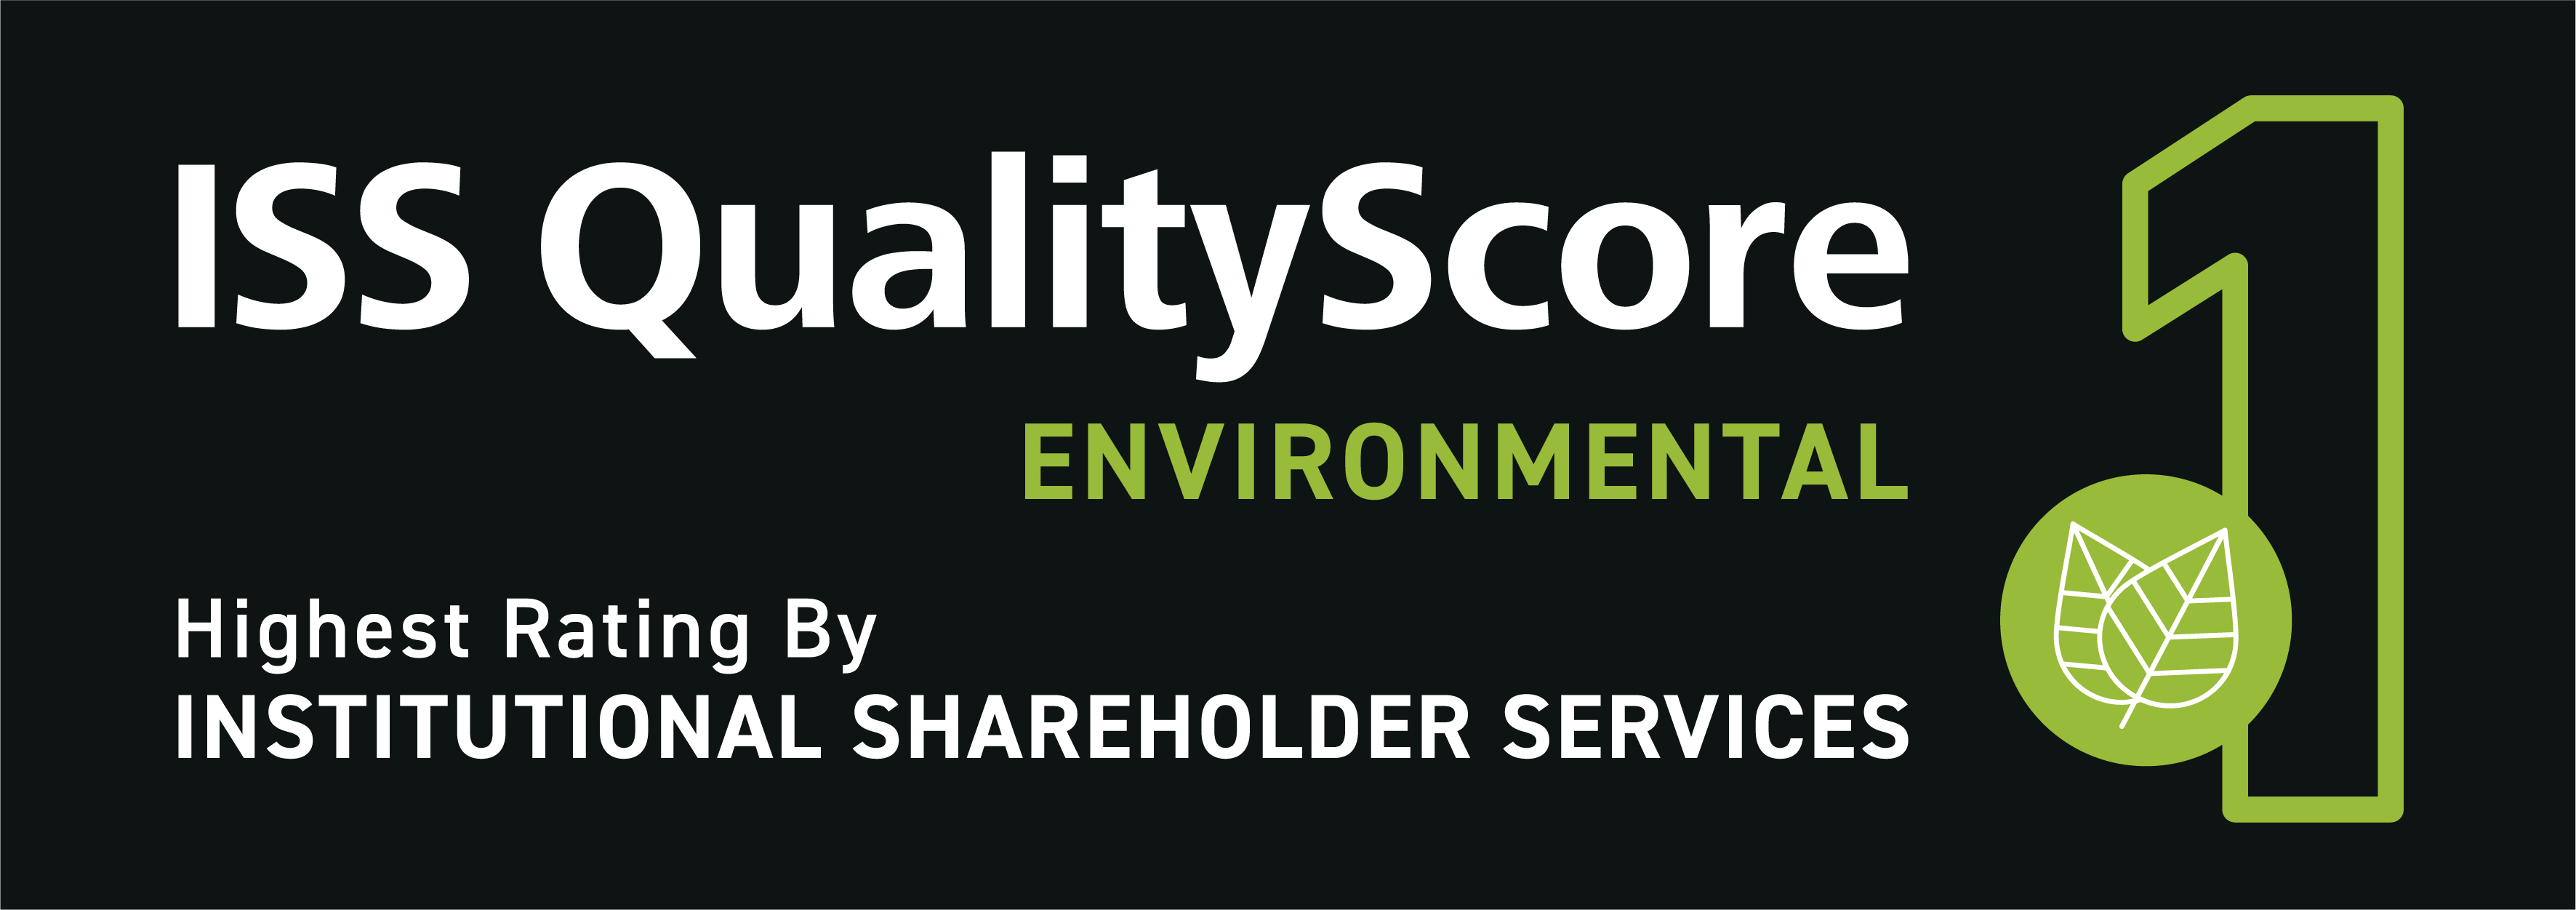 Text: ISS QualityScore Environmental 1. Highest rating by Institutional Shareholder Services